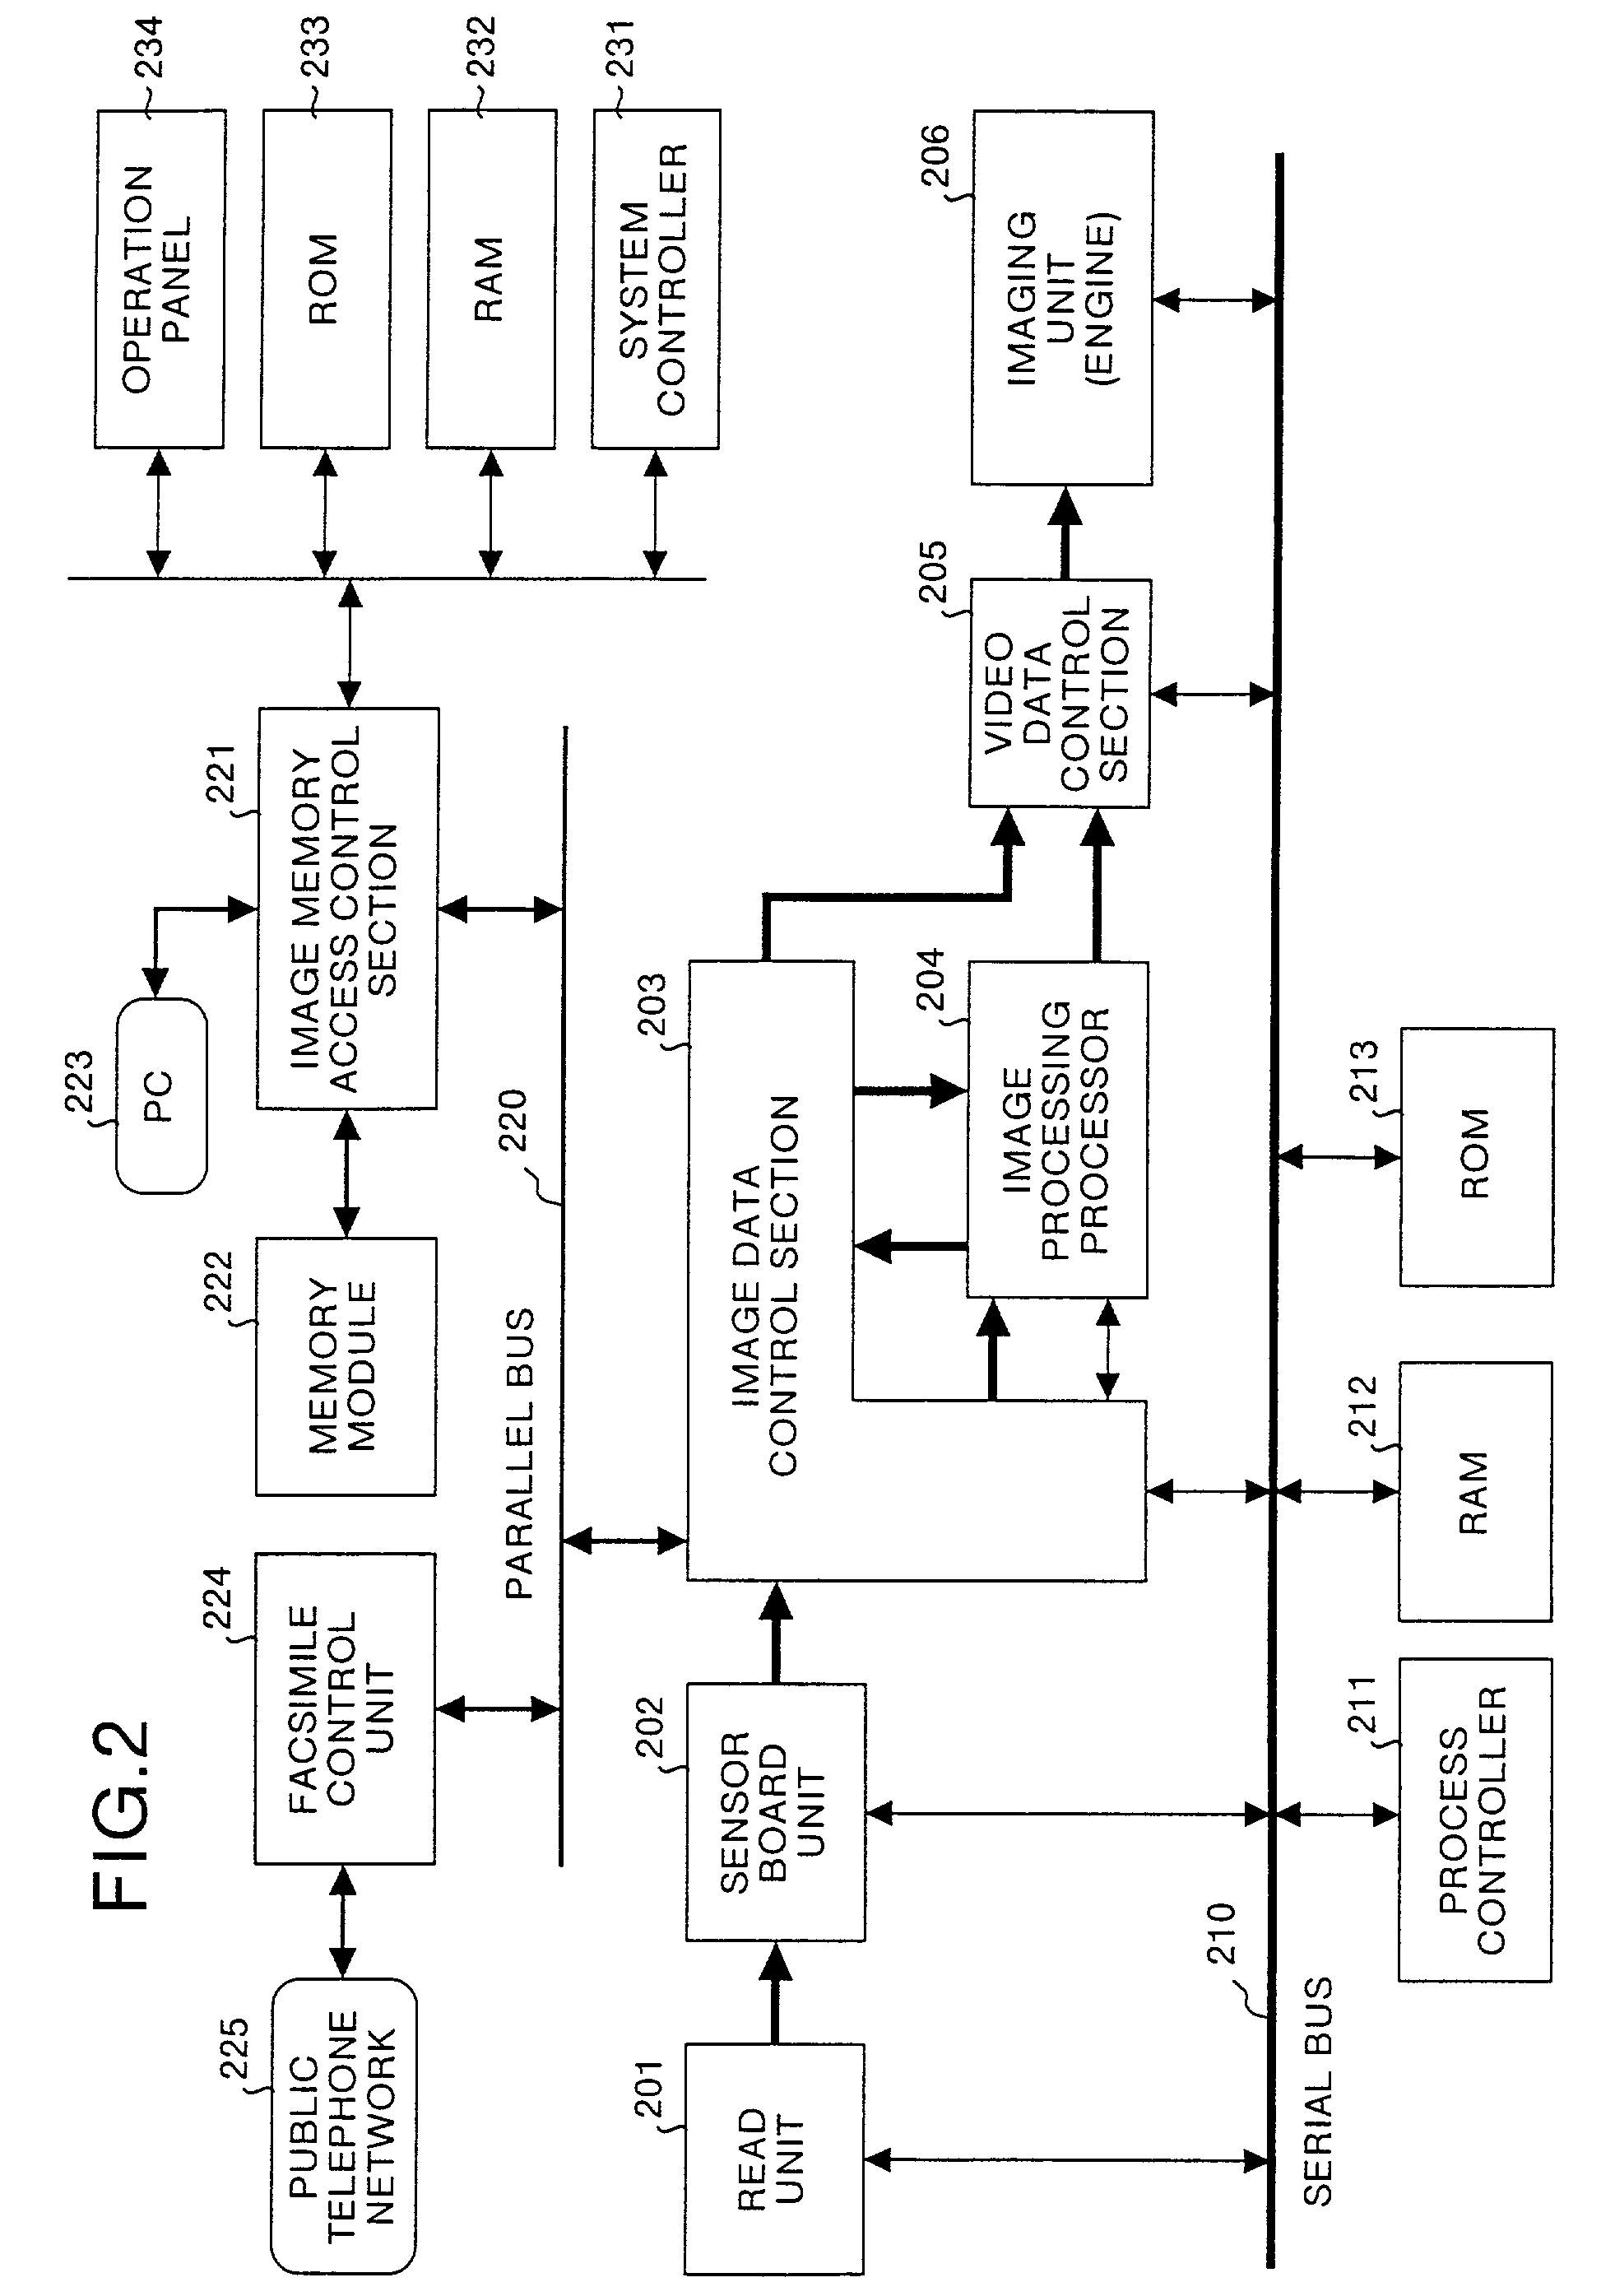 Method and apparatus for image processing, and a computer product